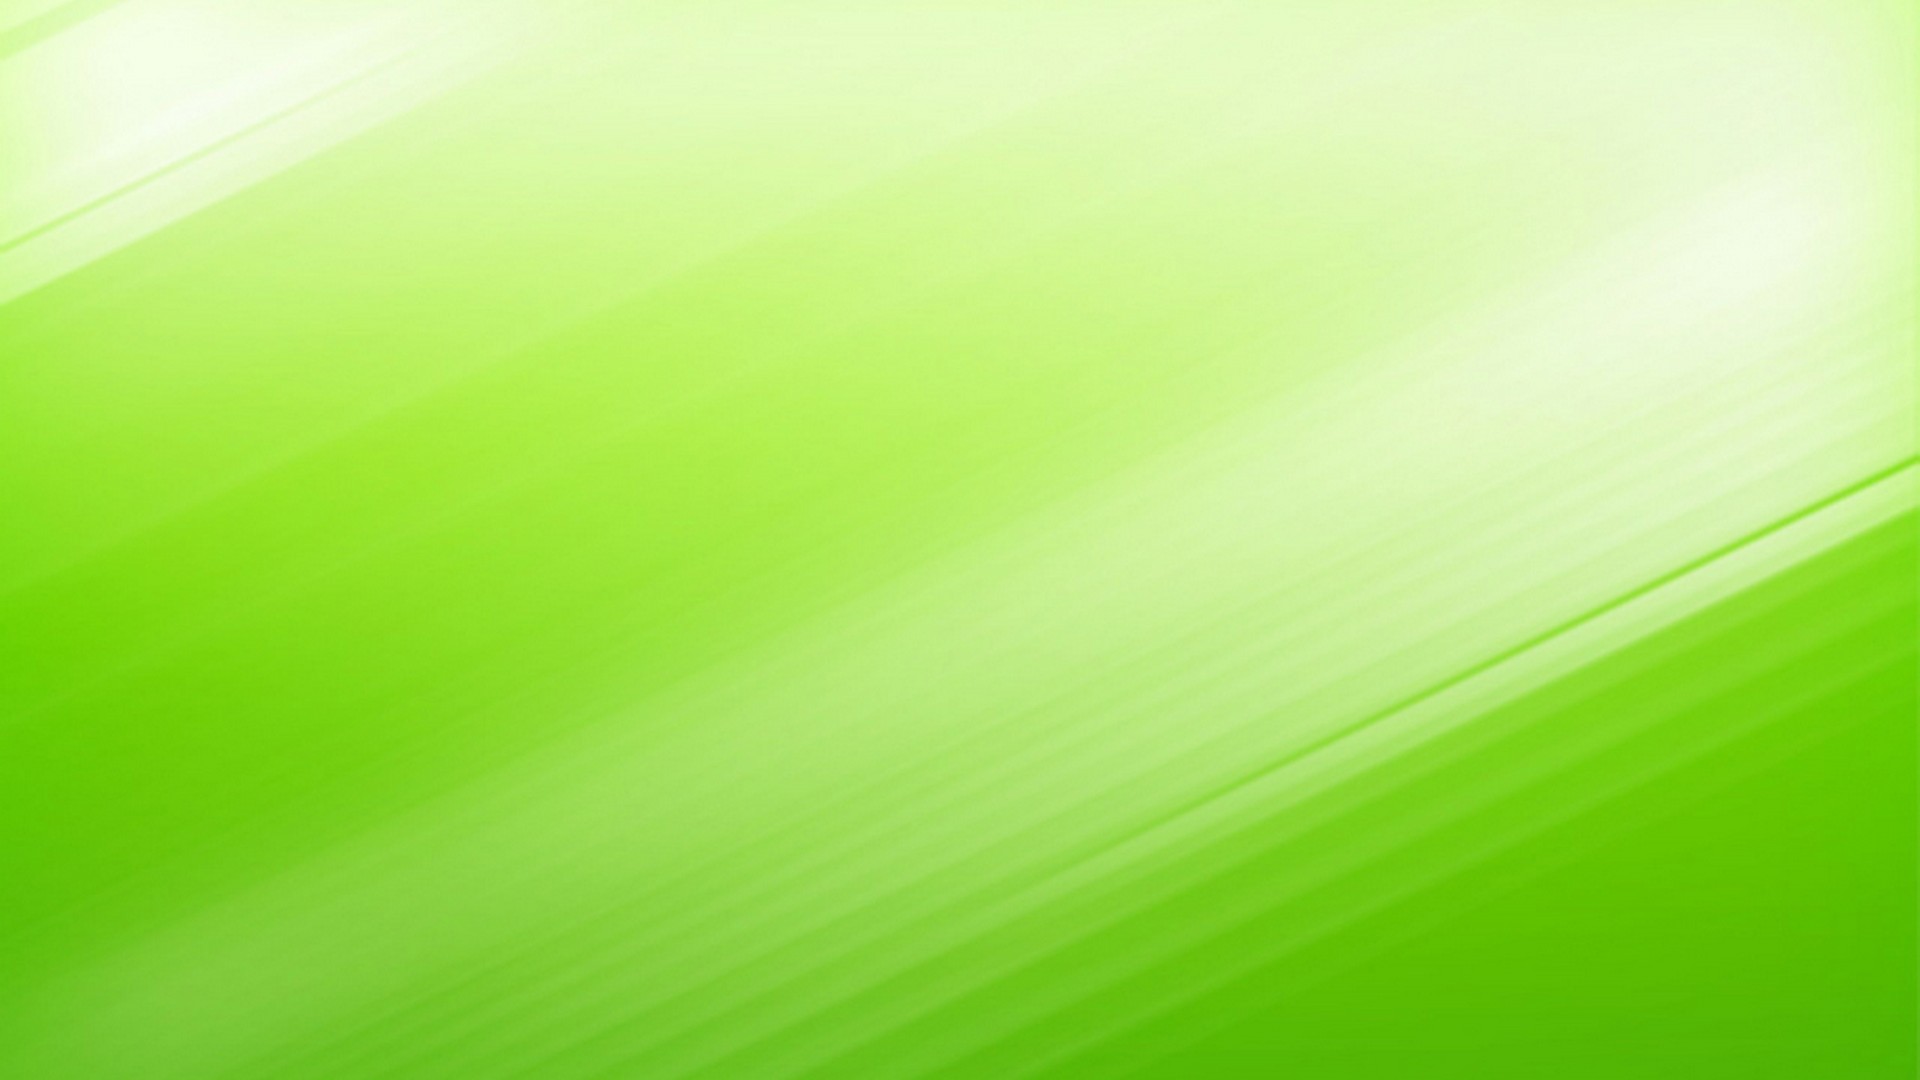 Lime Green Desktop Wallpaper with resolution 1920X1080 pixel. You can use this wallpaper as background for your desktop Computer Screensavers, Android or iPhone smartphones